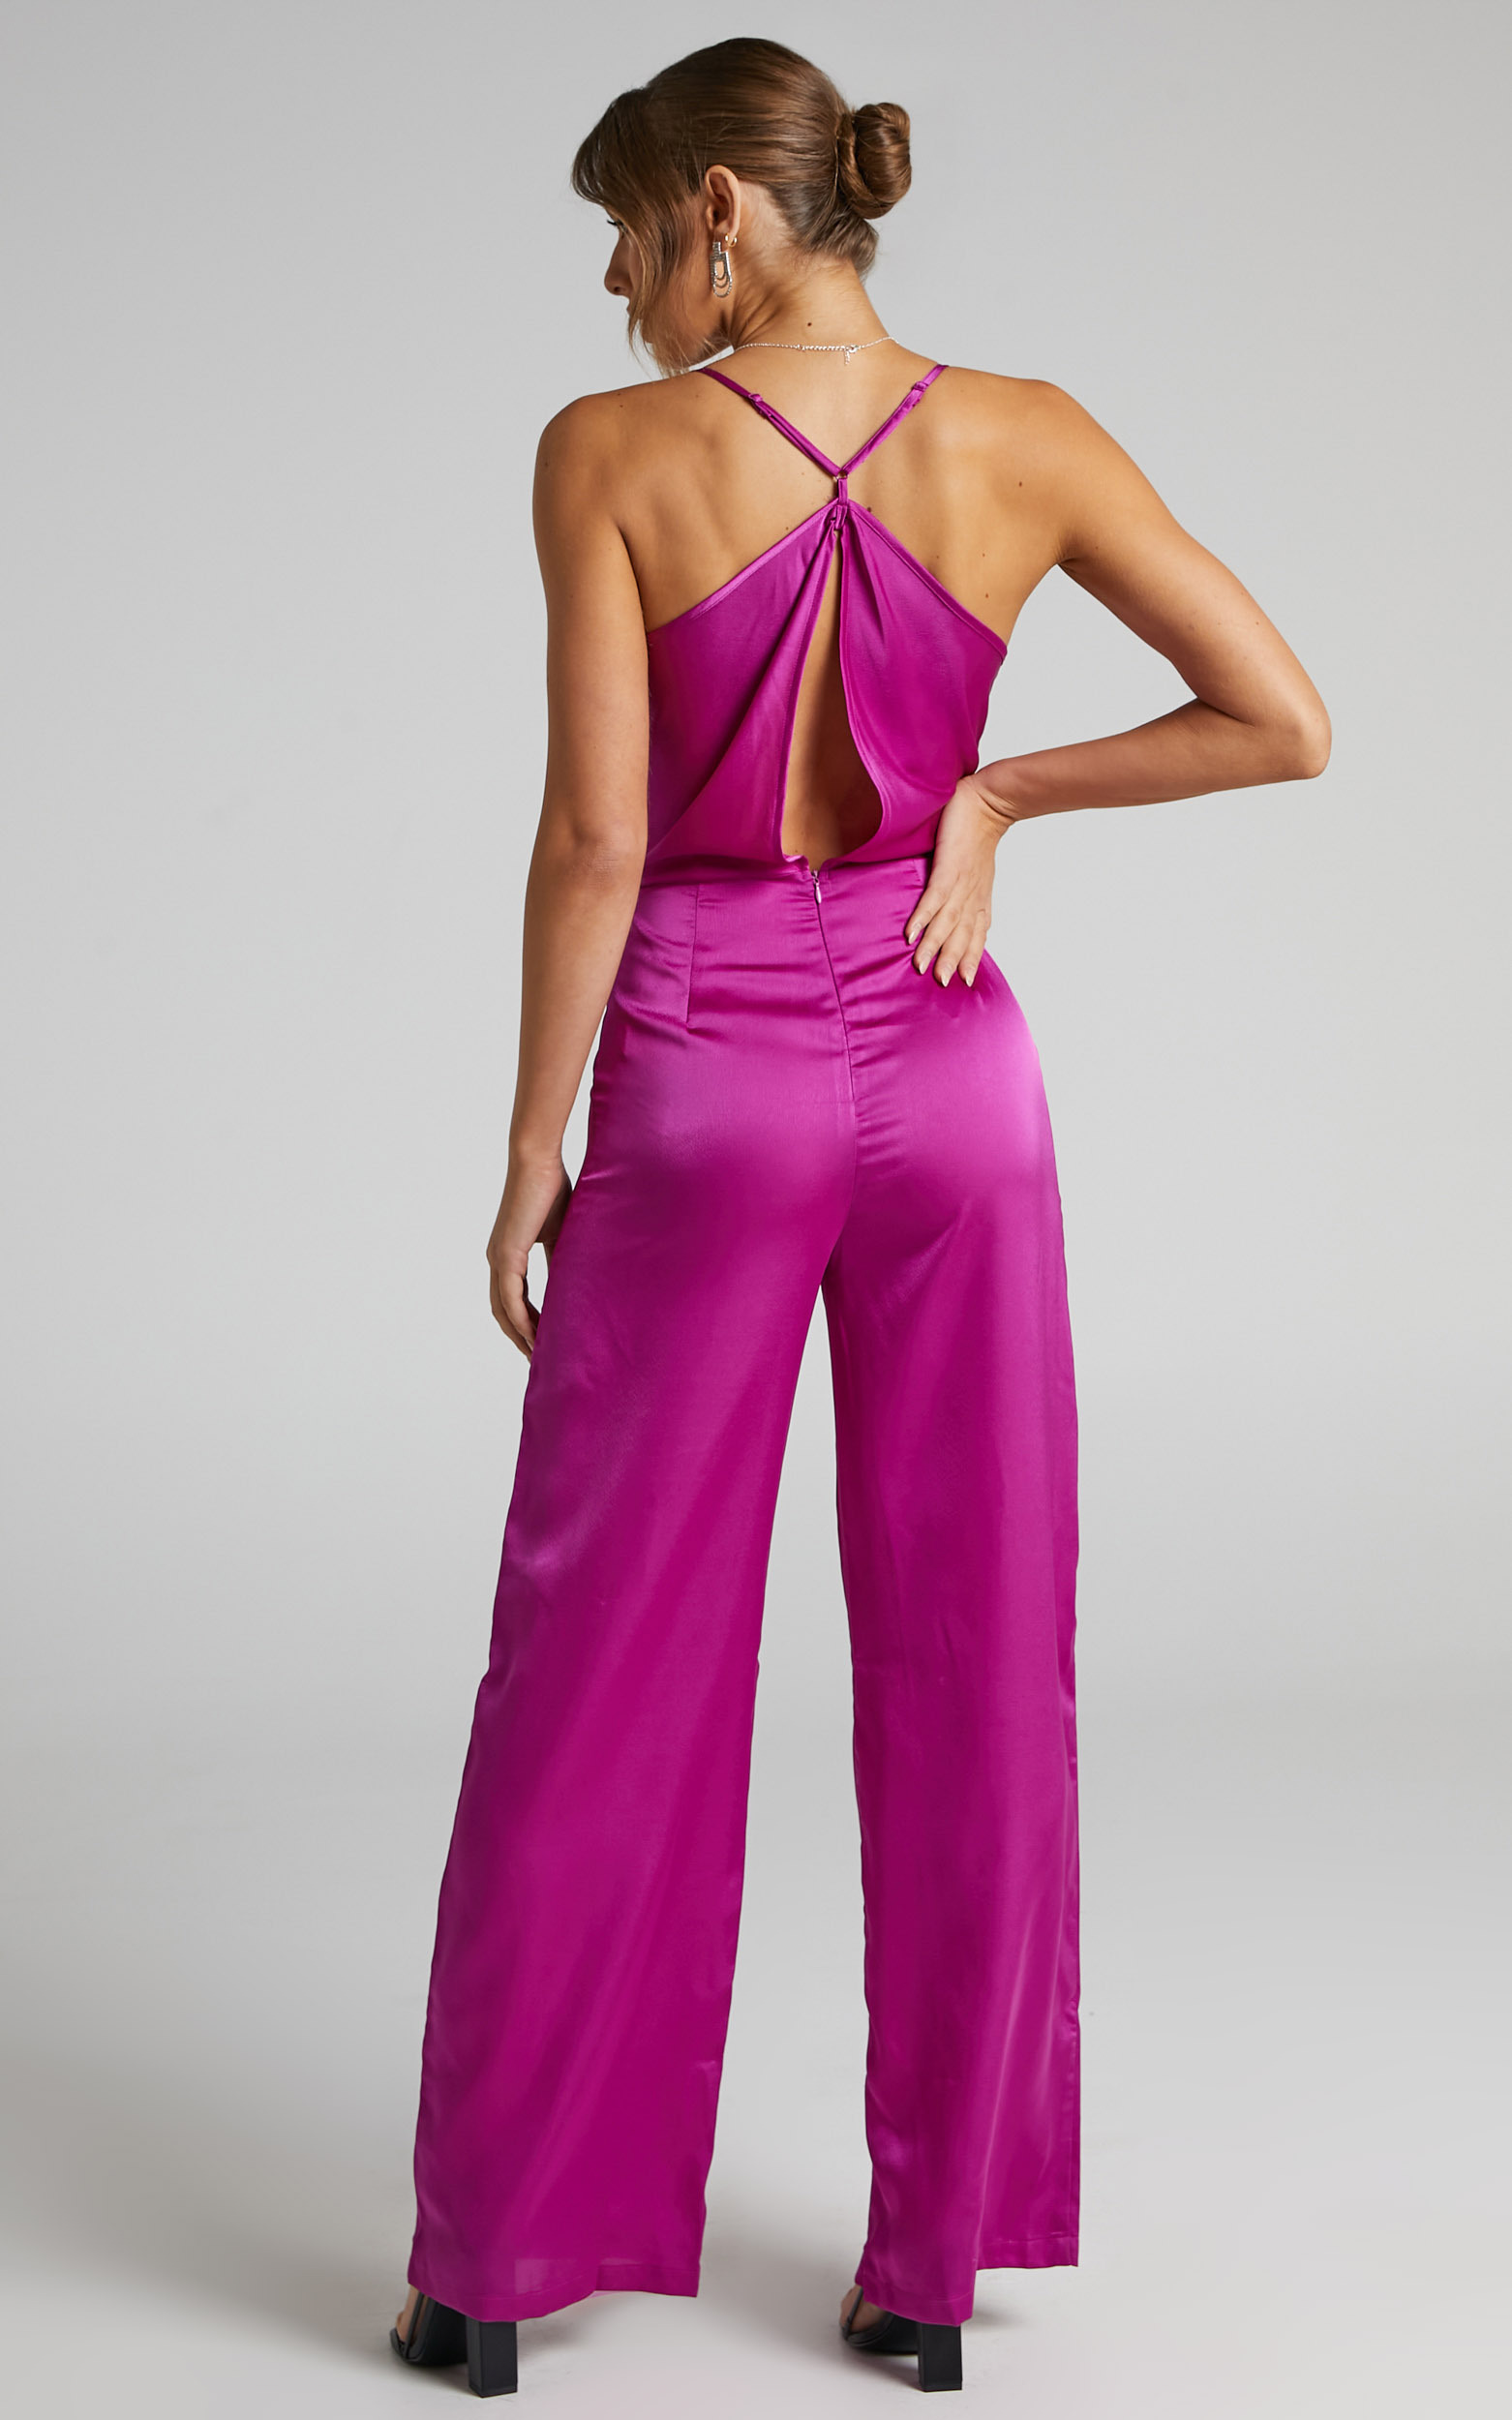 Kylene Cowl Neck Palazzo Satin Jumpsuit in Mulberry - 04, PRP2, hi-res image number null